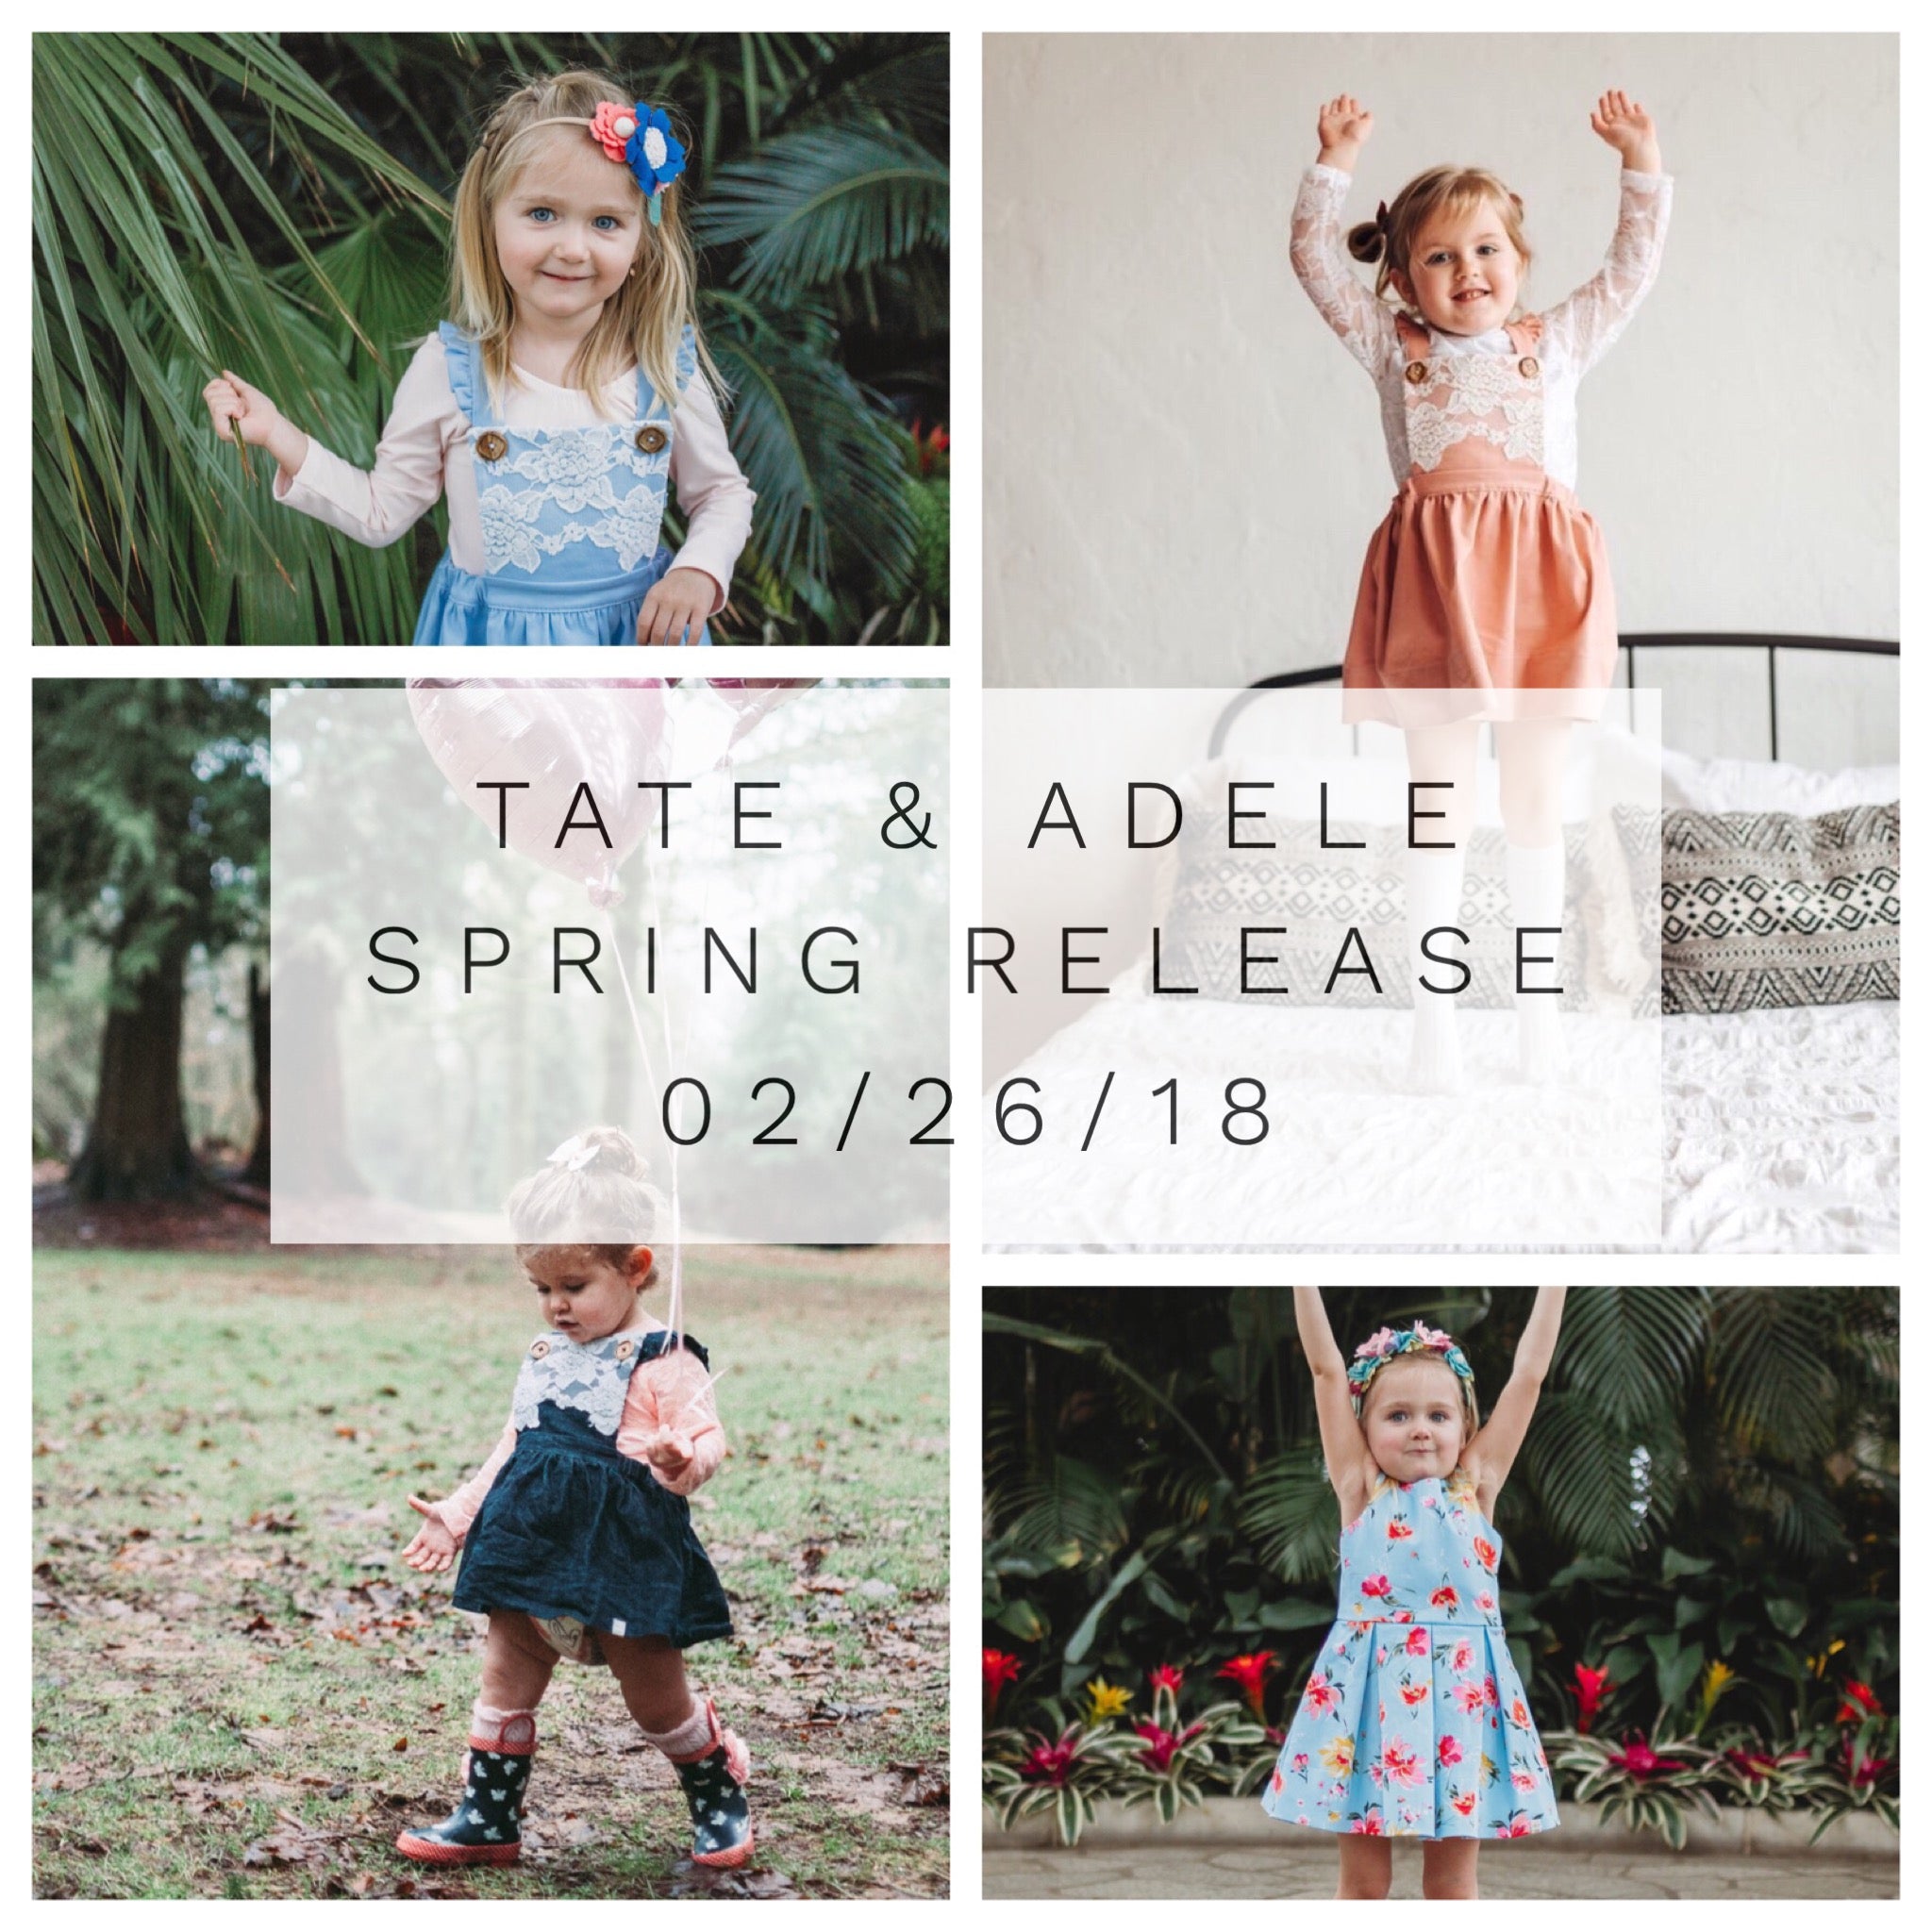 Spring 2018 Release Tate & Adele